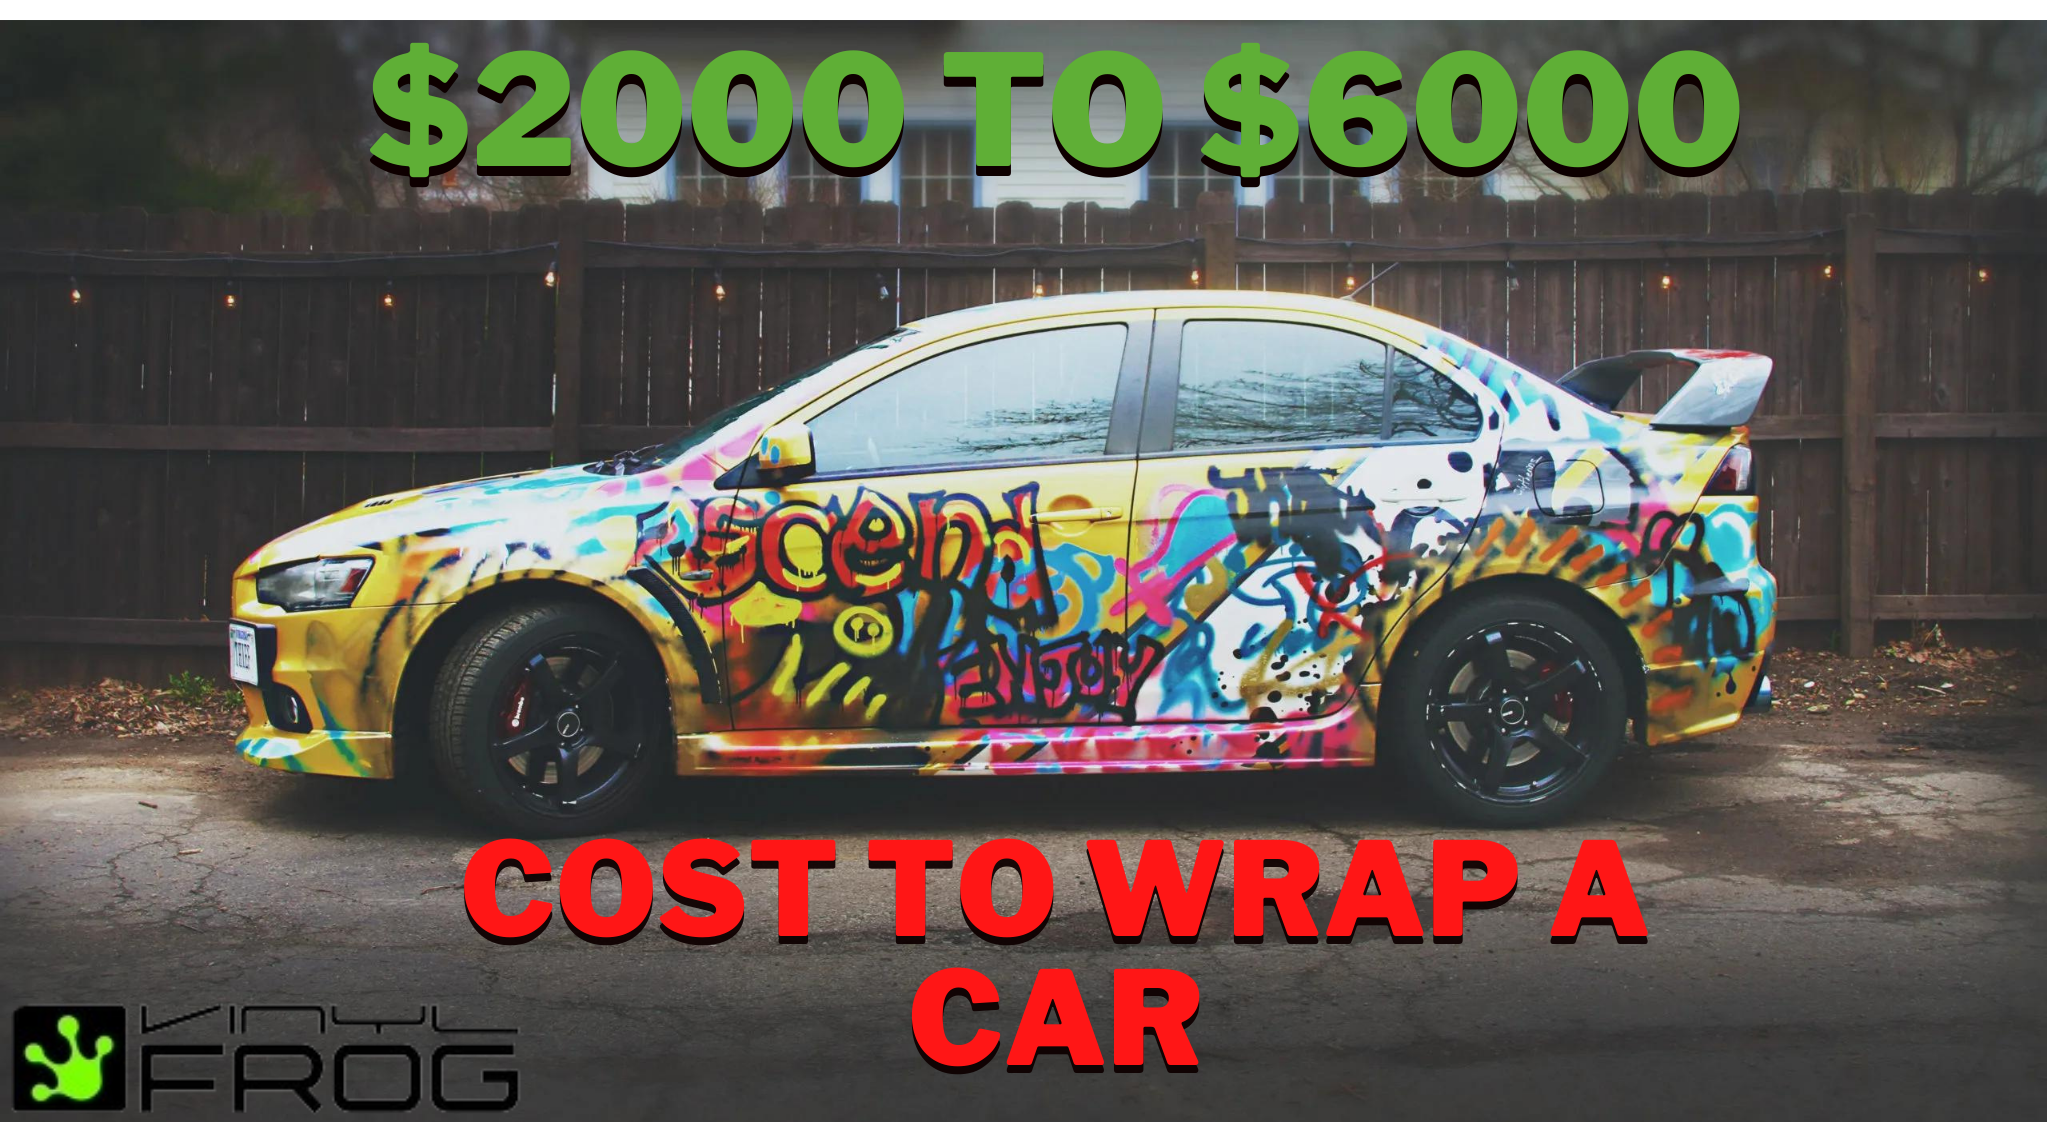 How Much Does It Cost To Wrap A Car?